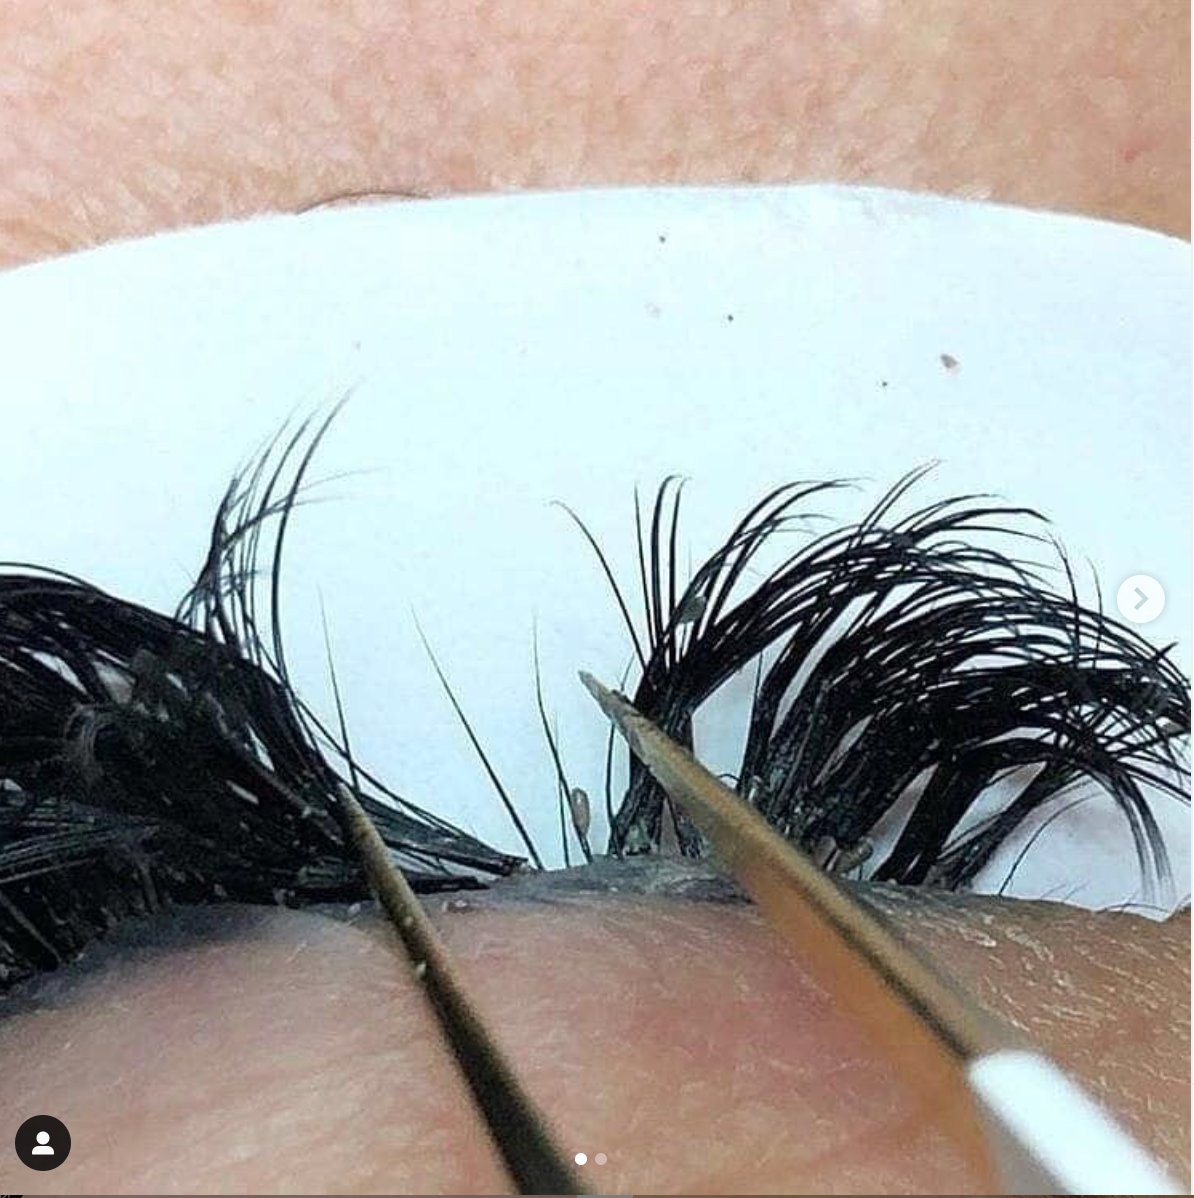 🤢🤮🤢🤮 repost from @Parislashacademyparislashacademy 'Here’s the example of why it’s SO IMPORTANT to clean your lashes everyday!!! Lashes are here to protect our eyes and catch dirt, bacteria, etc. from going into our eyes.Even with extensions, '